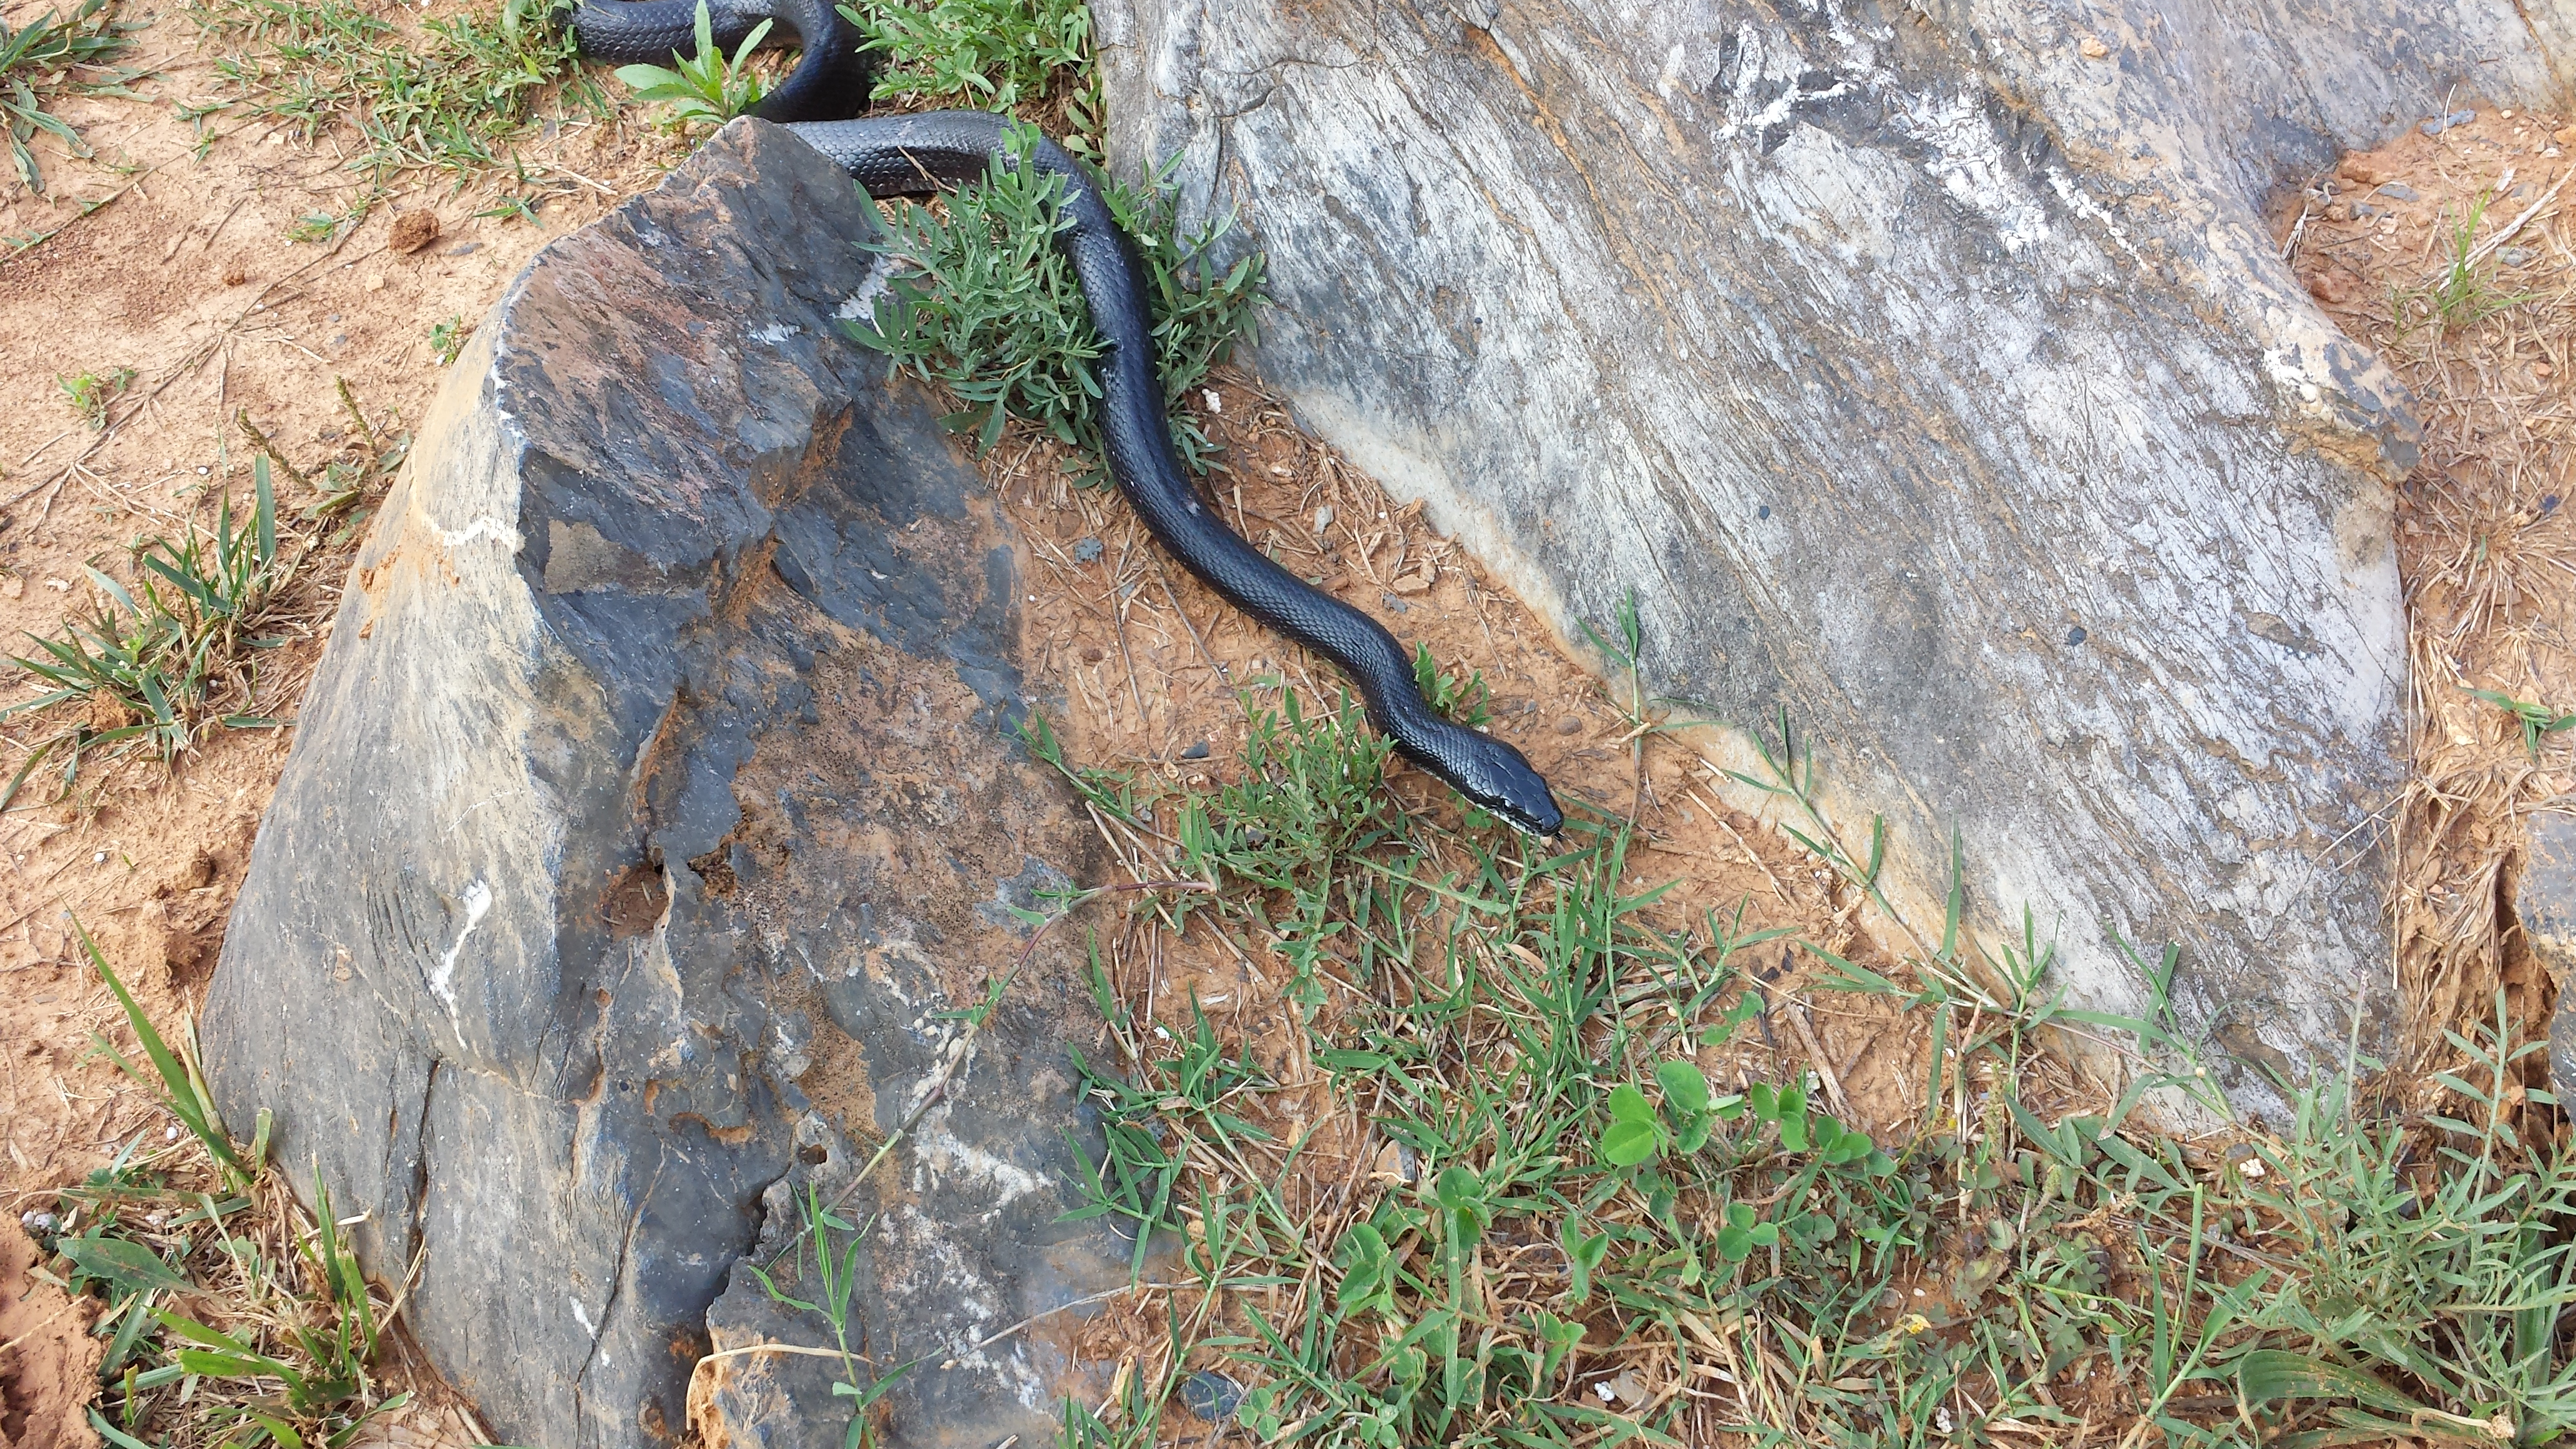 Fairfax Co. police offer snake safety tips